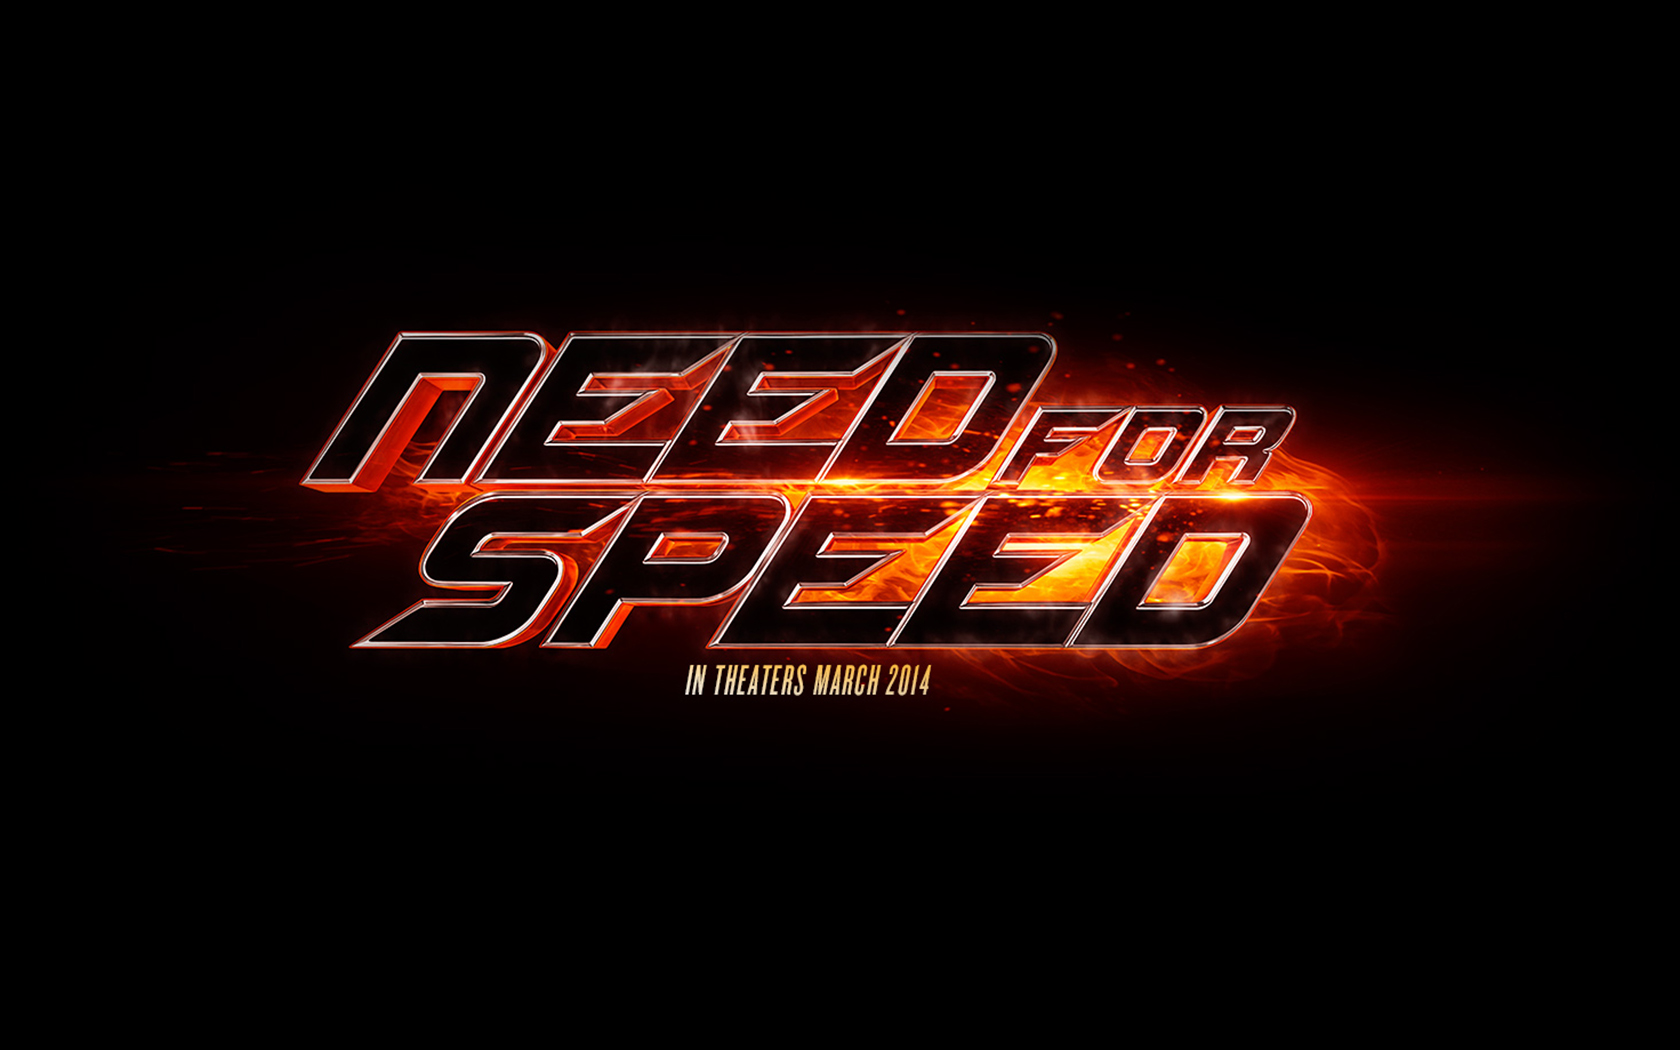 ANALYSE BOX-OFFICE US WEEK-END DU 14 AU 16 MARS 2014 : NEED FOR SPEED